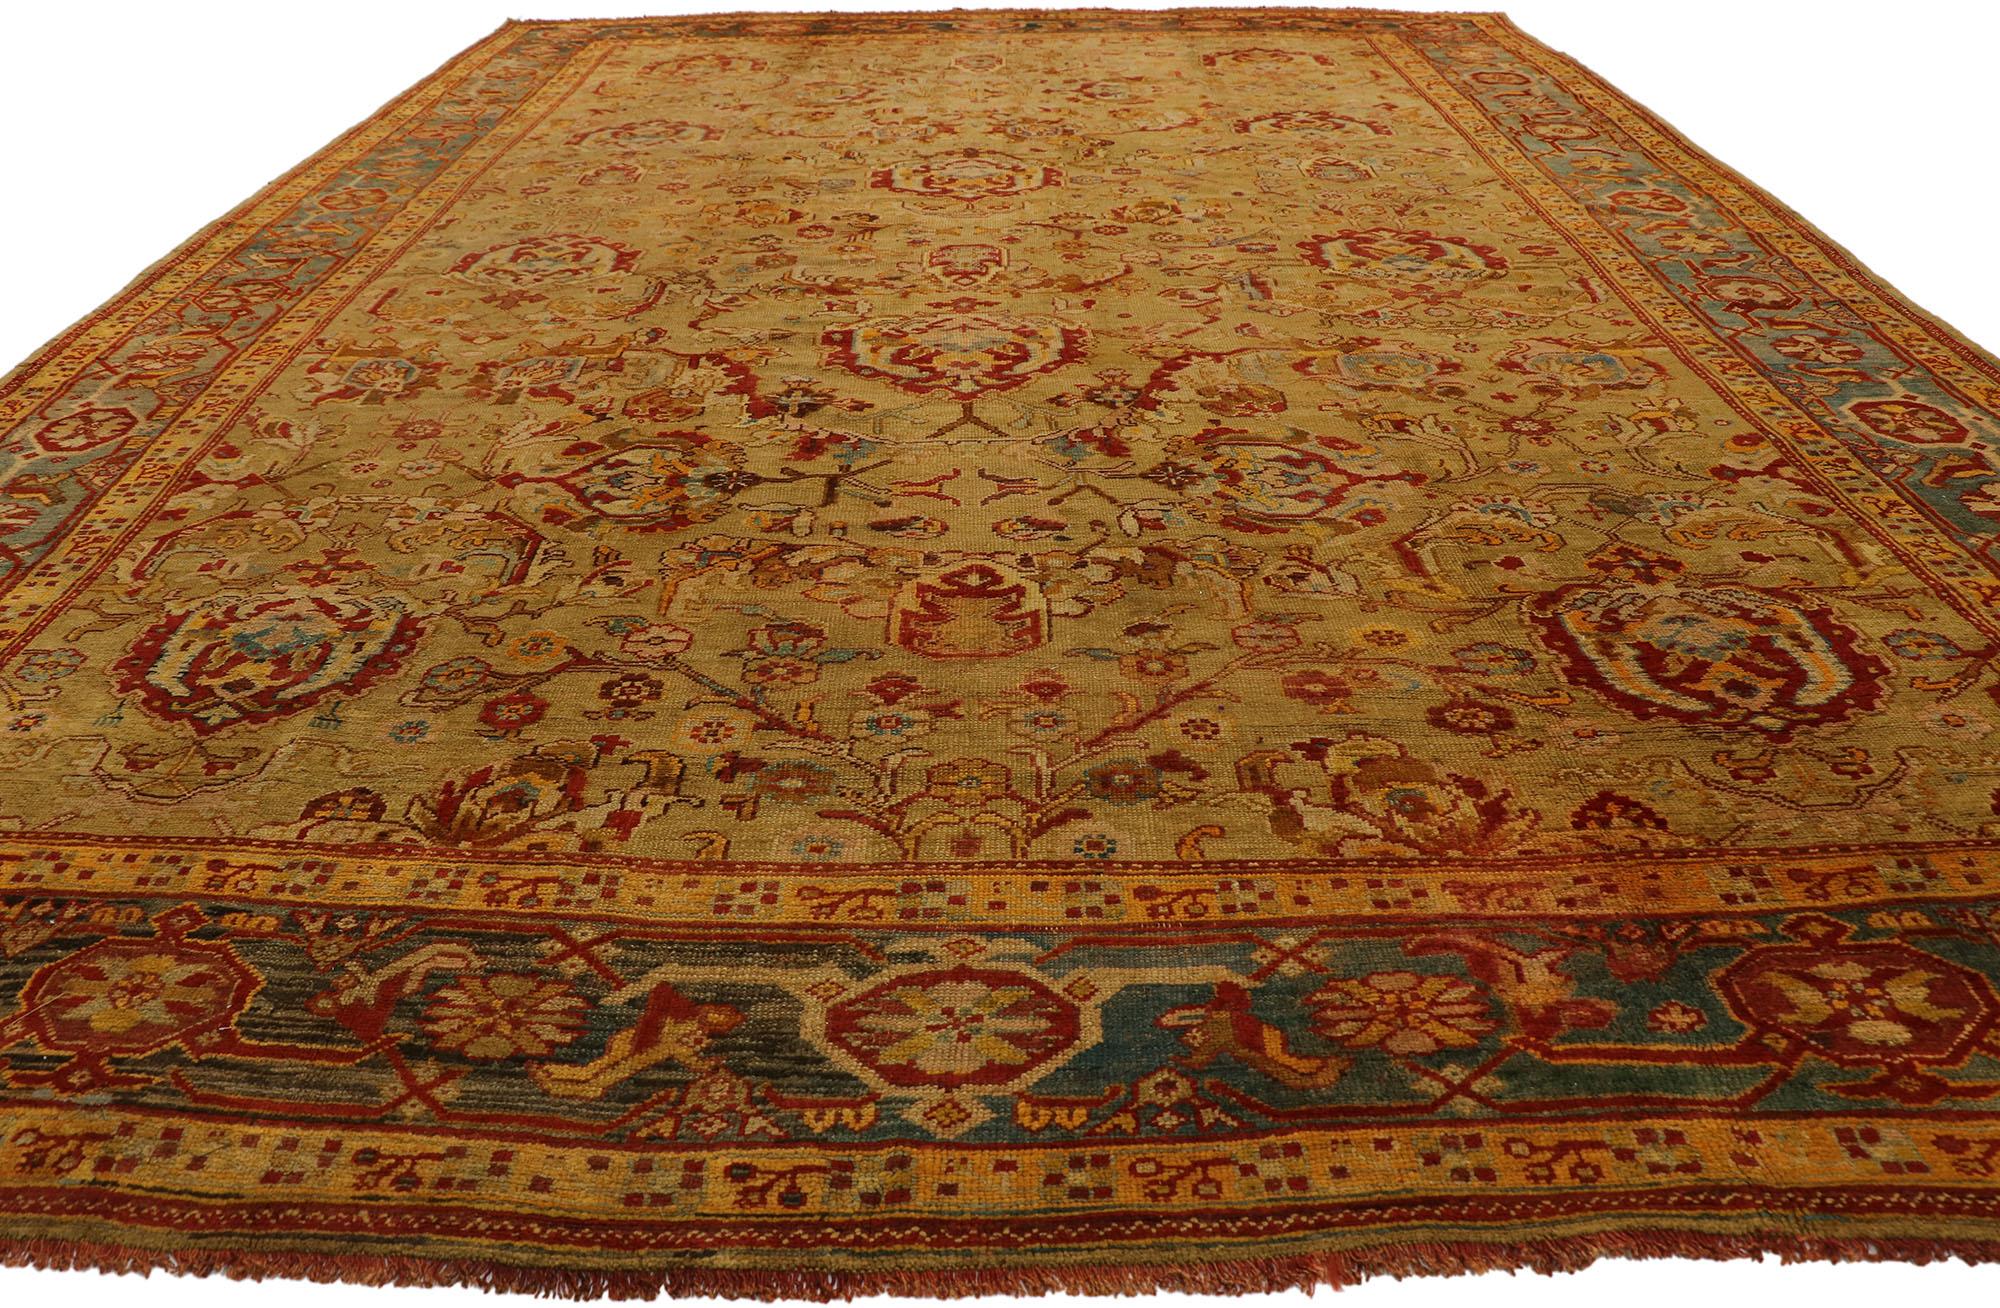 Oversized Antique Turkish Oushak Rug, Rustic Charm Meets Mediterranean Style In Good Condition For Sale In Dallas, TX